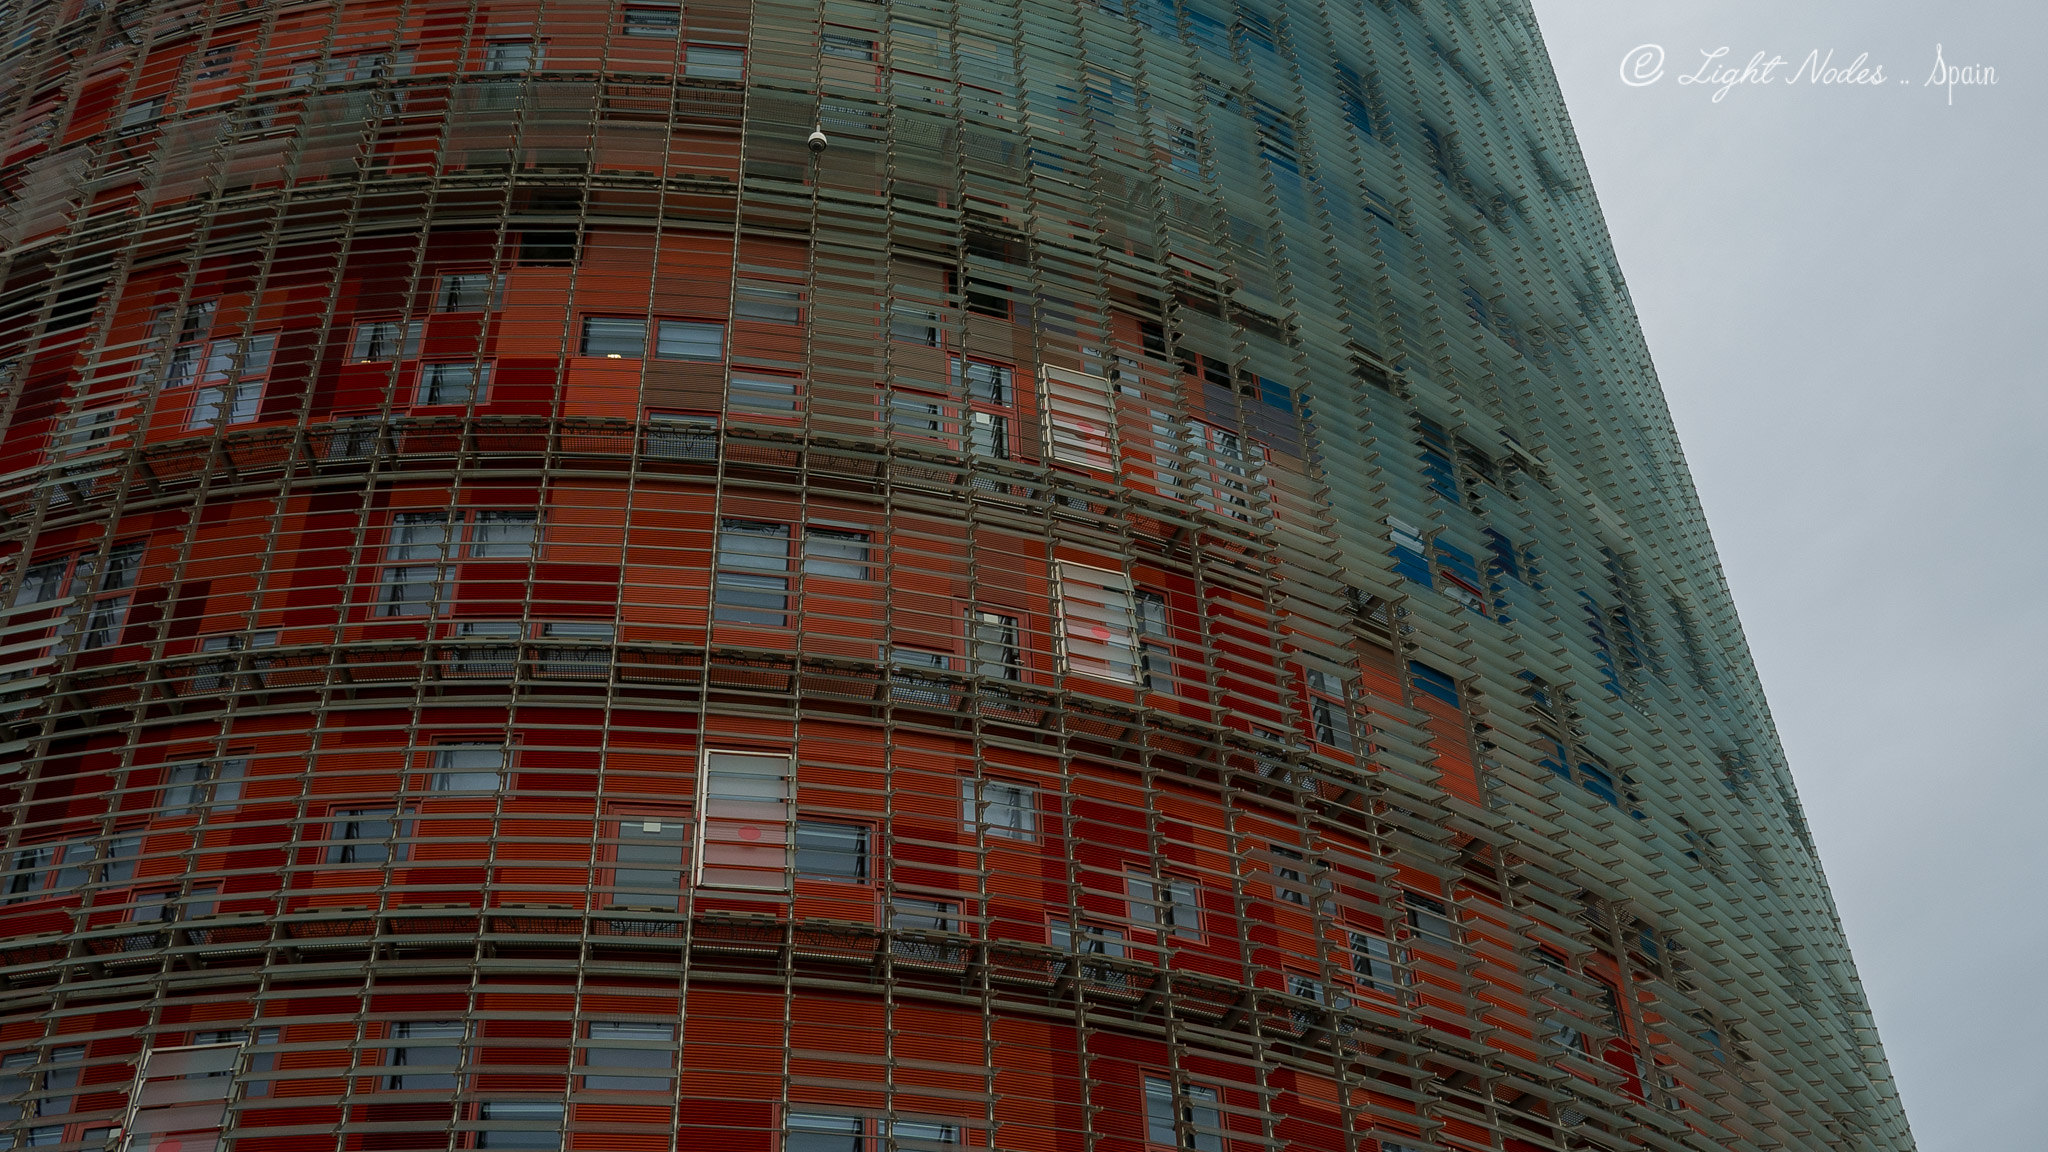 Torre Agbar, Barcelona, Spain with Lumix GX7 and 20mm